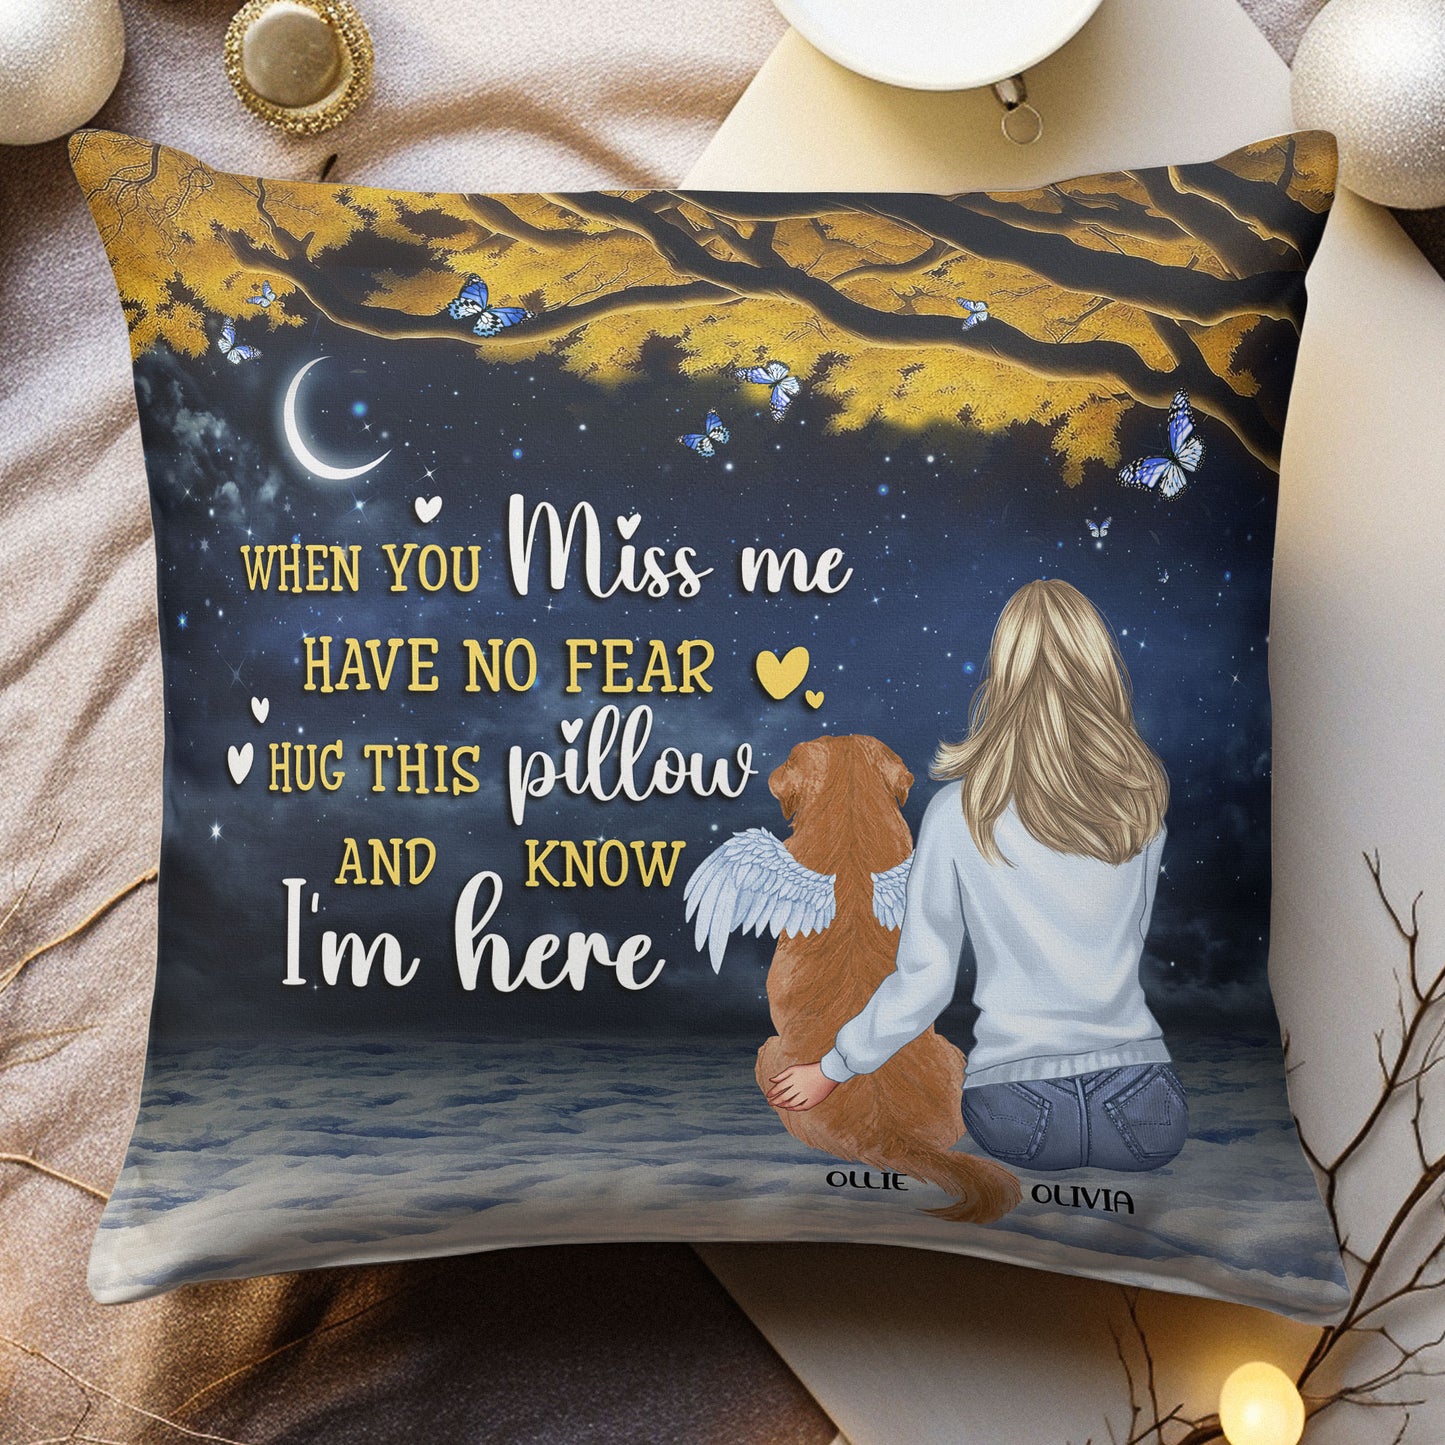 When You Miss Me Hug This Pillow And Know I'M Here - Personalized Pillow (Insert Included)